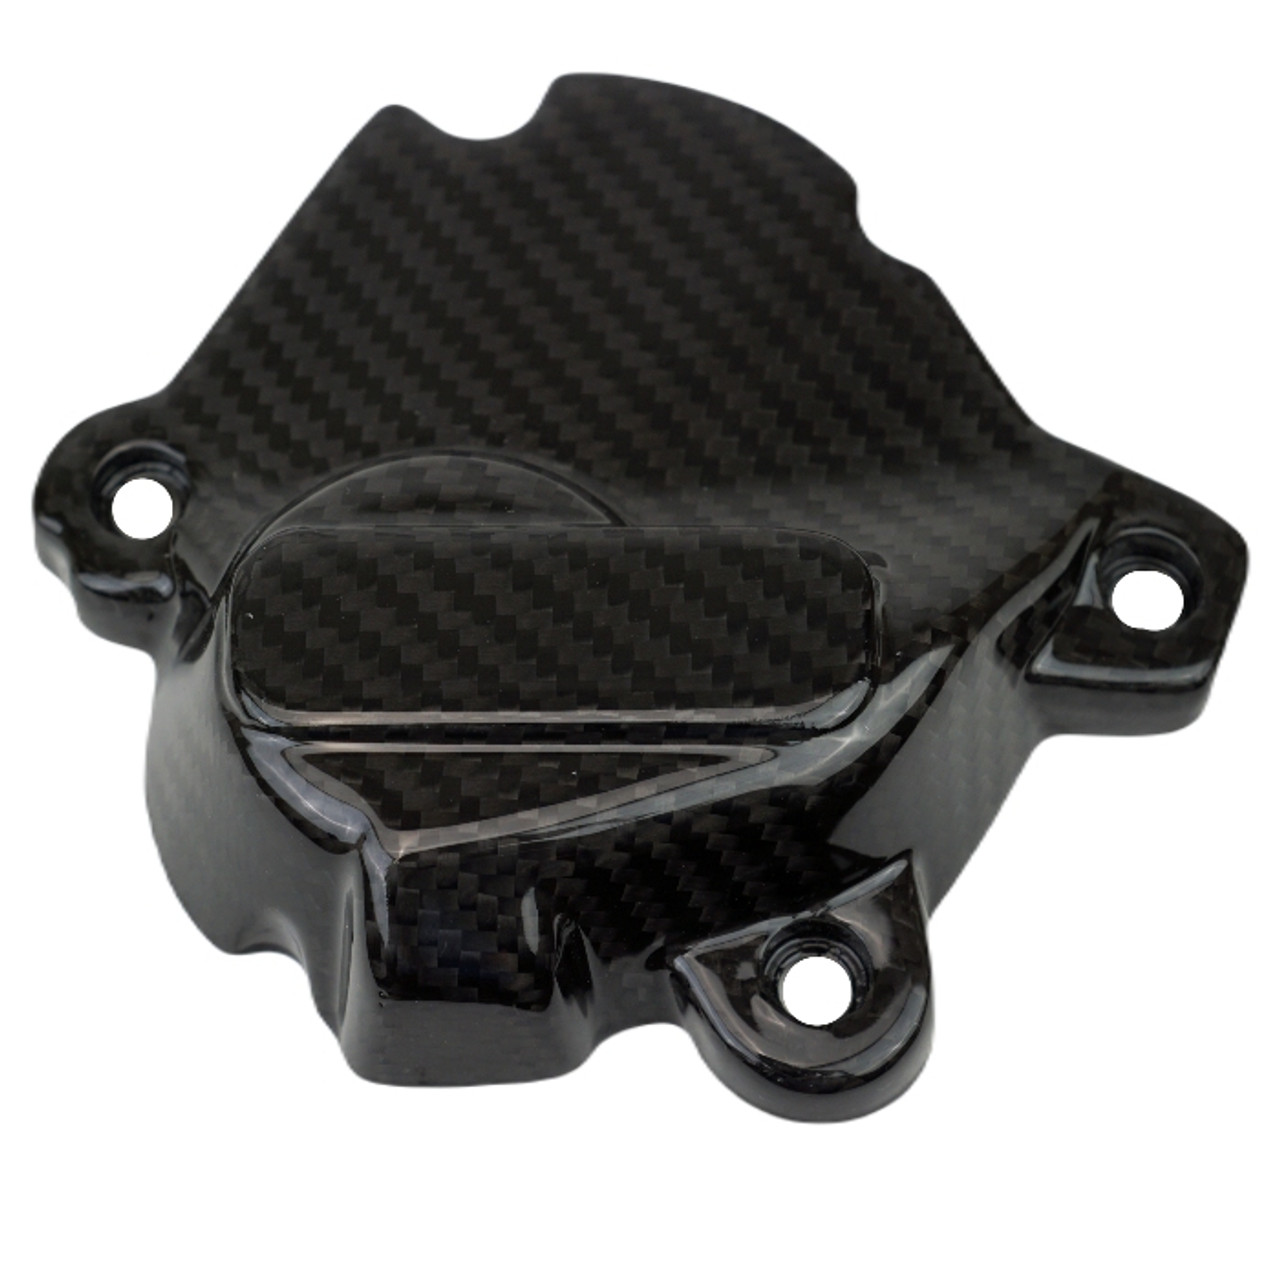 Starter Cover Protector in Glossy Twill Weave Carbon Fiber for Honda CBR1000RR-R and SP 2020+ 